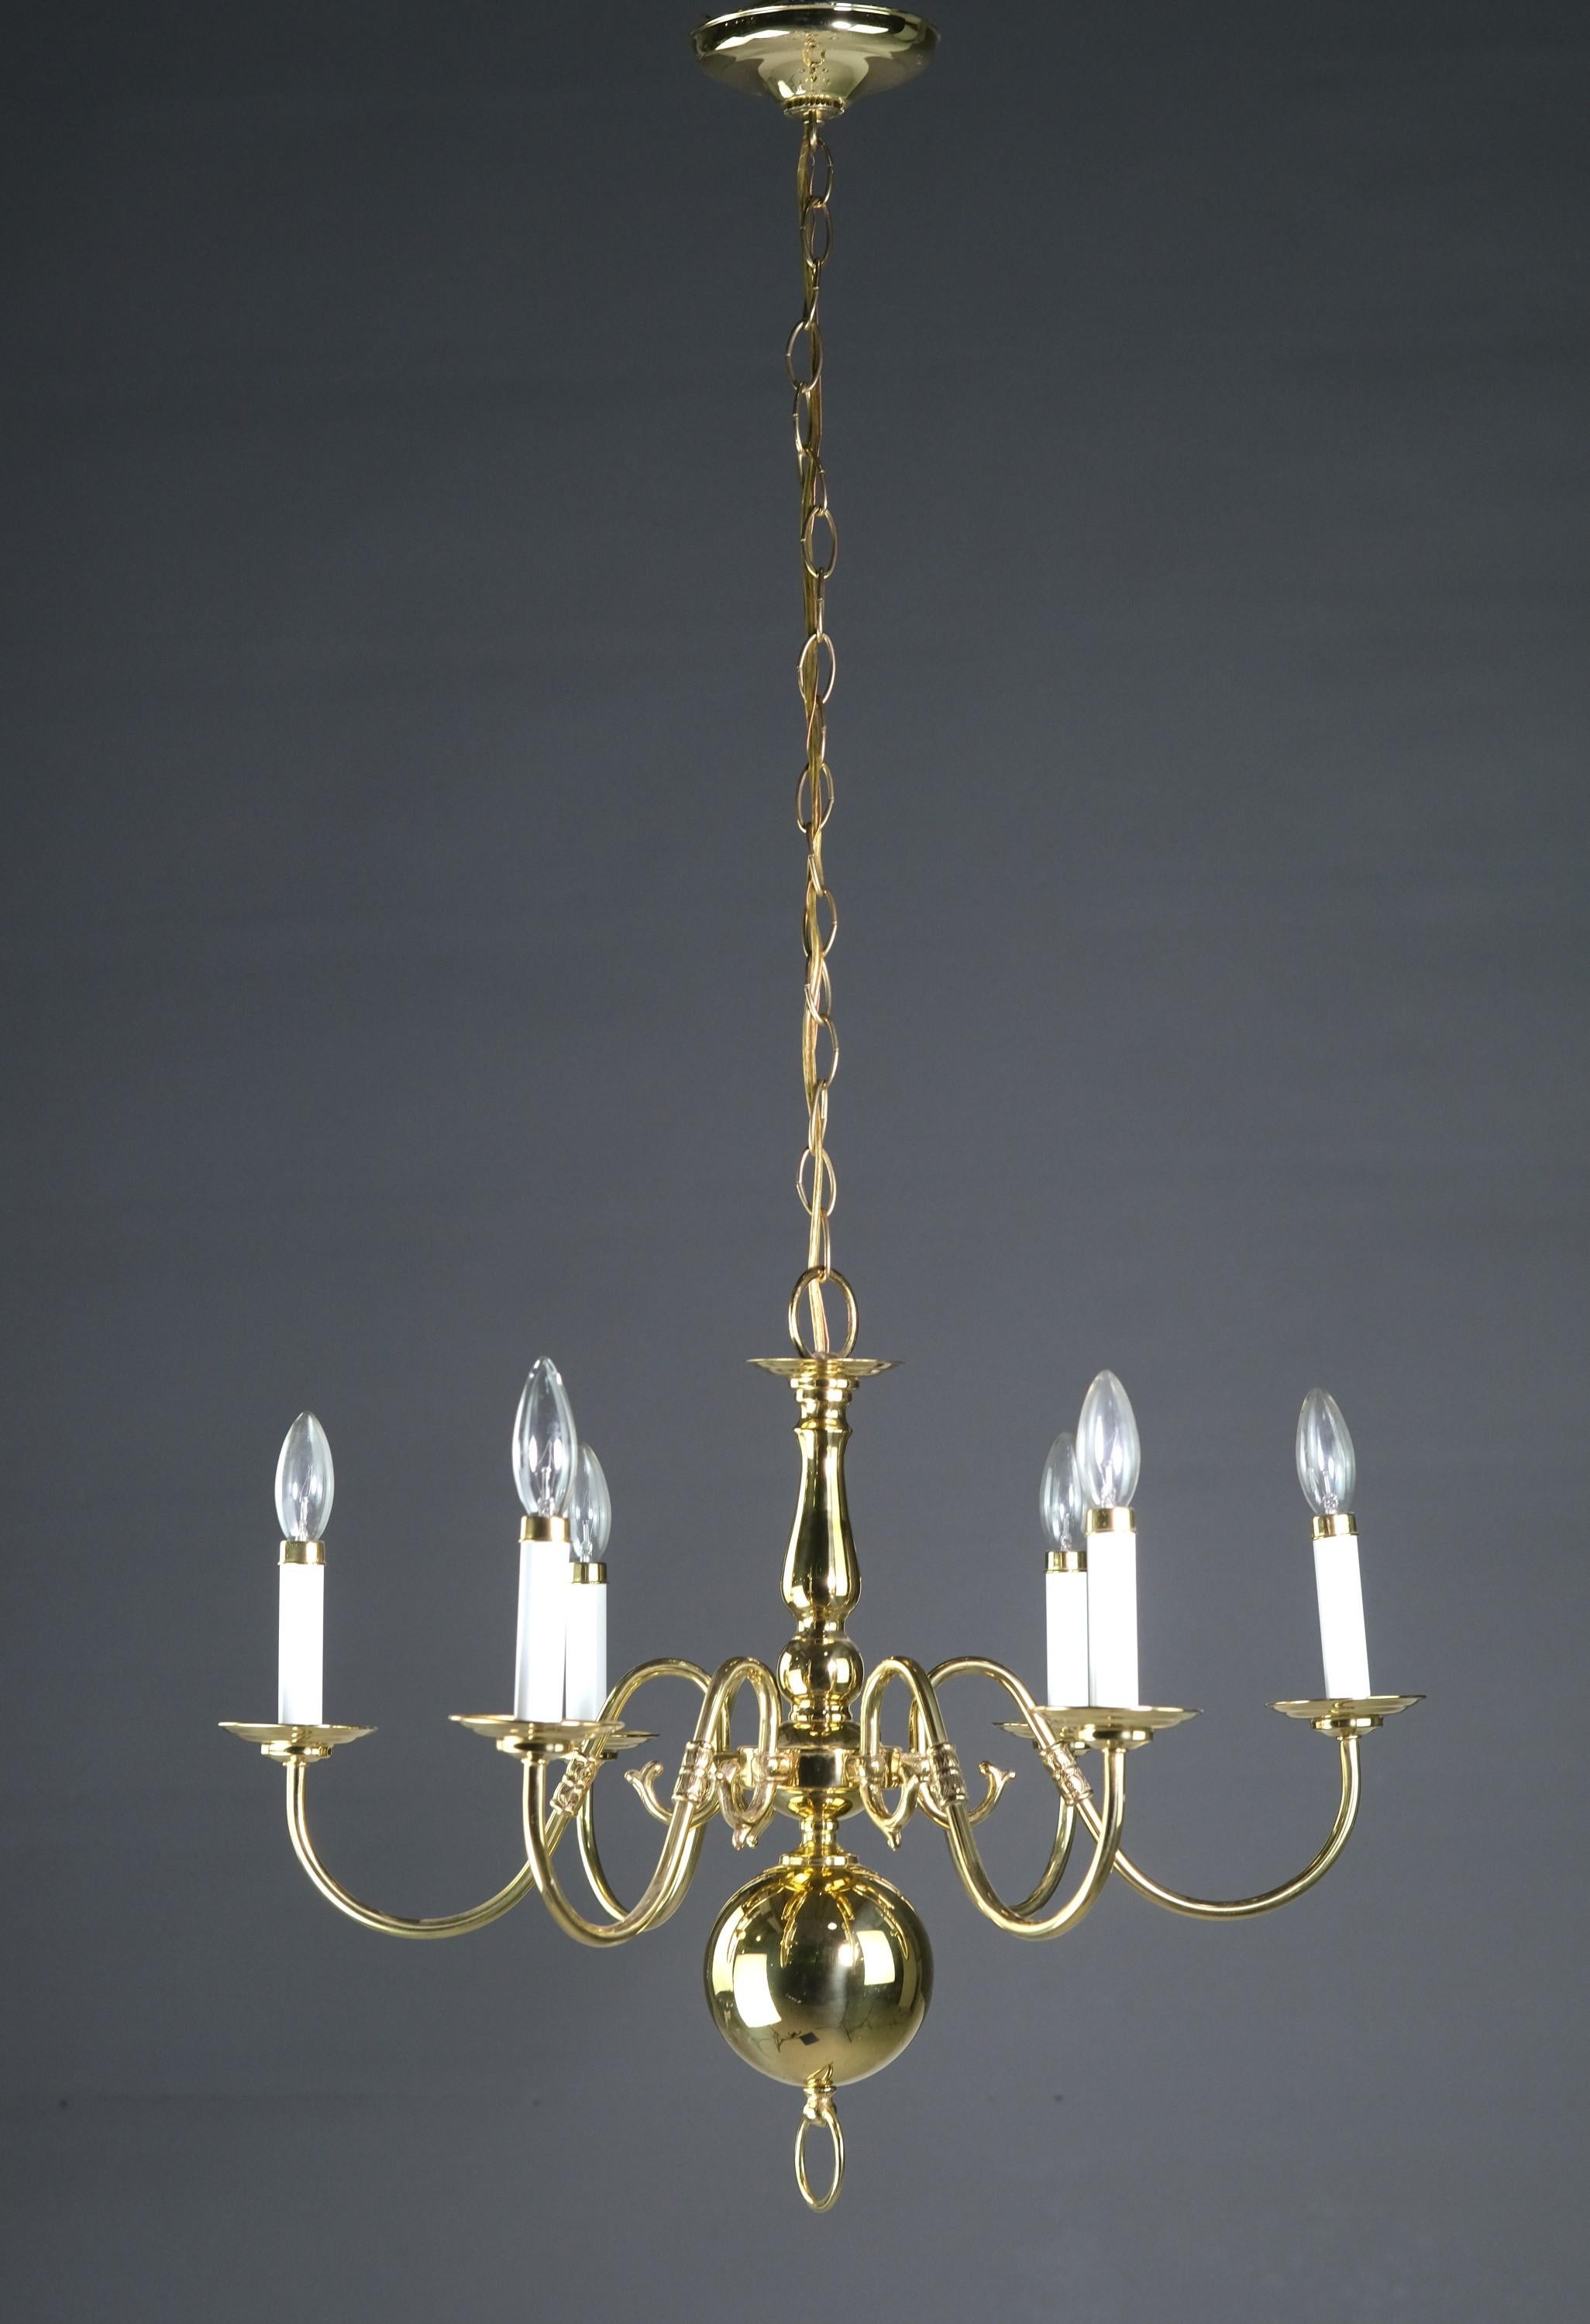 20th Century Williamsburg chandelier manufactured with a polished brass finish. Th six arms are arranged in a hexagon pattern. Takes six standard household candelabra lightbulbs. Cleaned and restored. Please note, this item is located in our